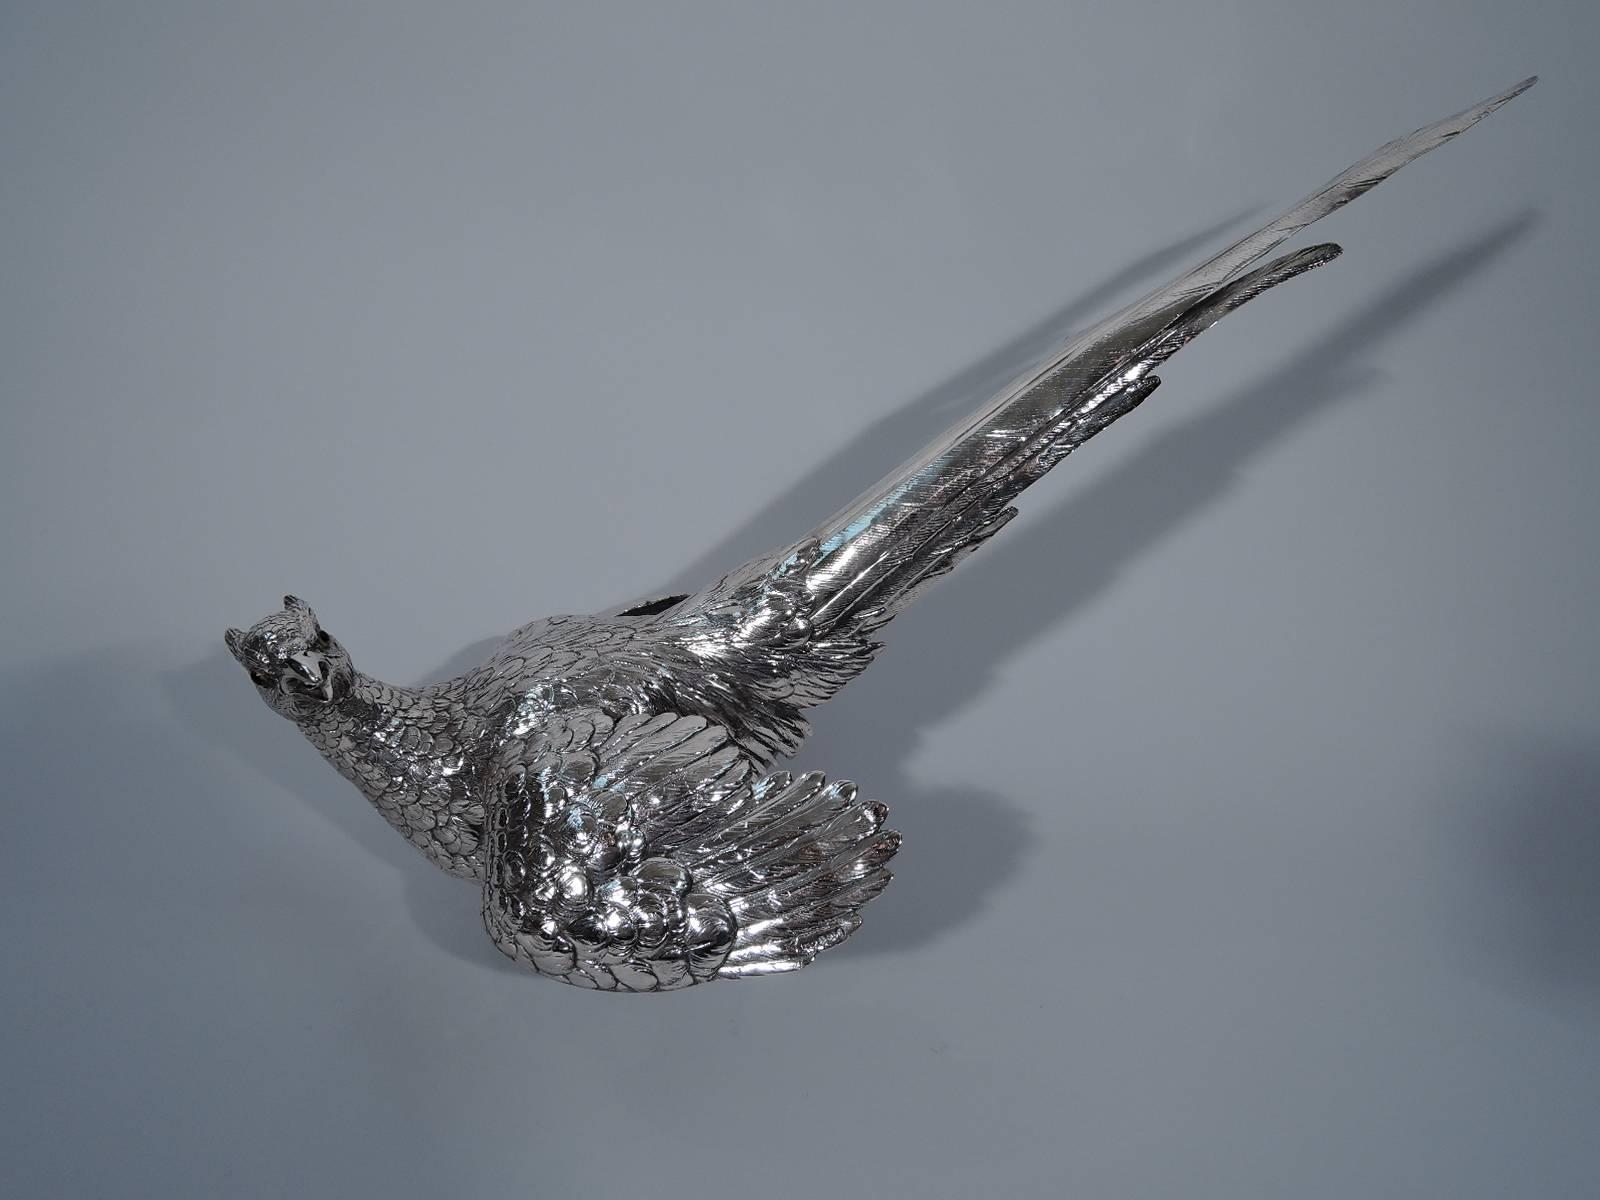 Pair of sterling silver pheasants. Imported to London by JMR in 1964. The two birds appear startled. The male turns his head and flexes his wings. The female has her wings raised for flight. Fine delineation of the feathers and scaly talons as well